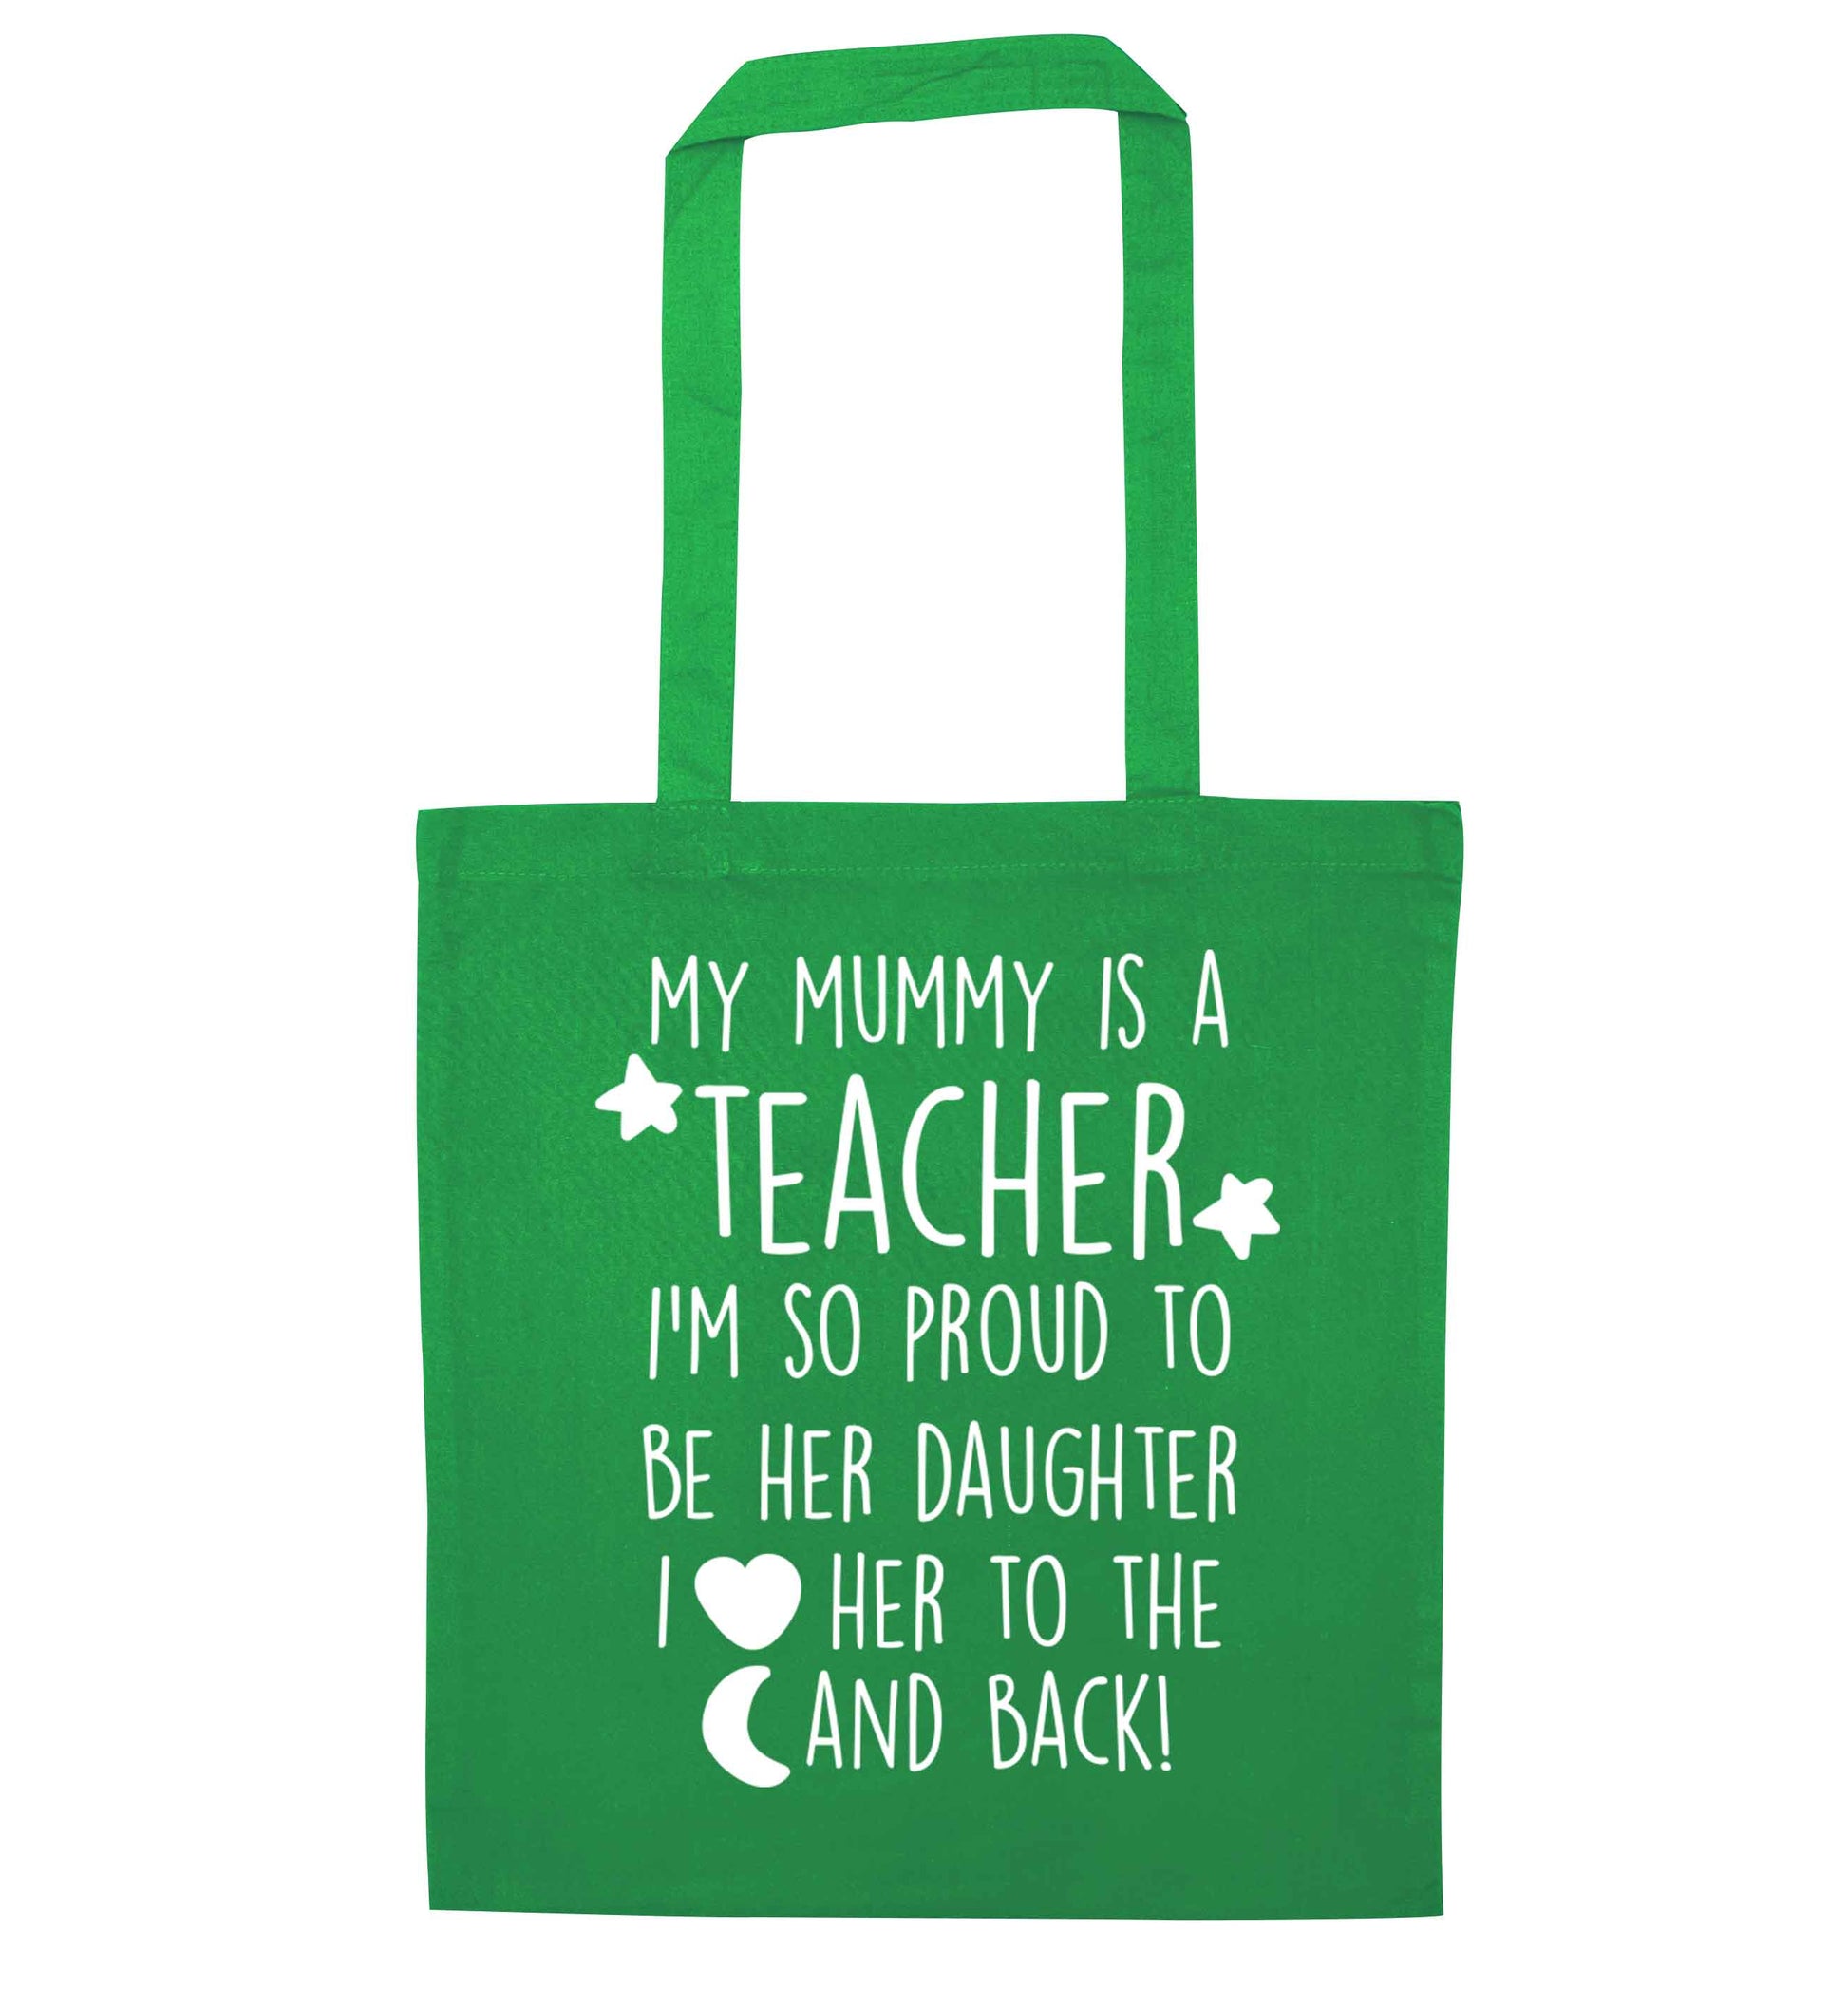 My mummy is a teacher I'm so proud to be her daughter I love her to the moon and back green tote bag